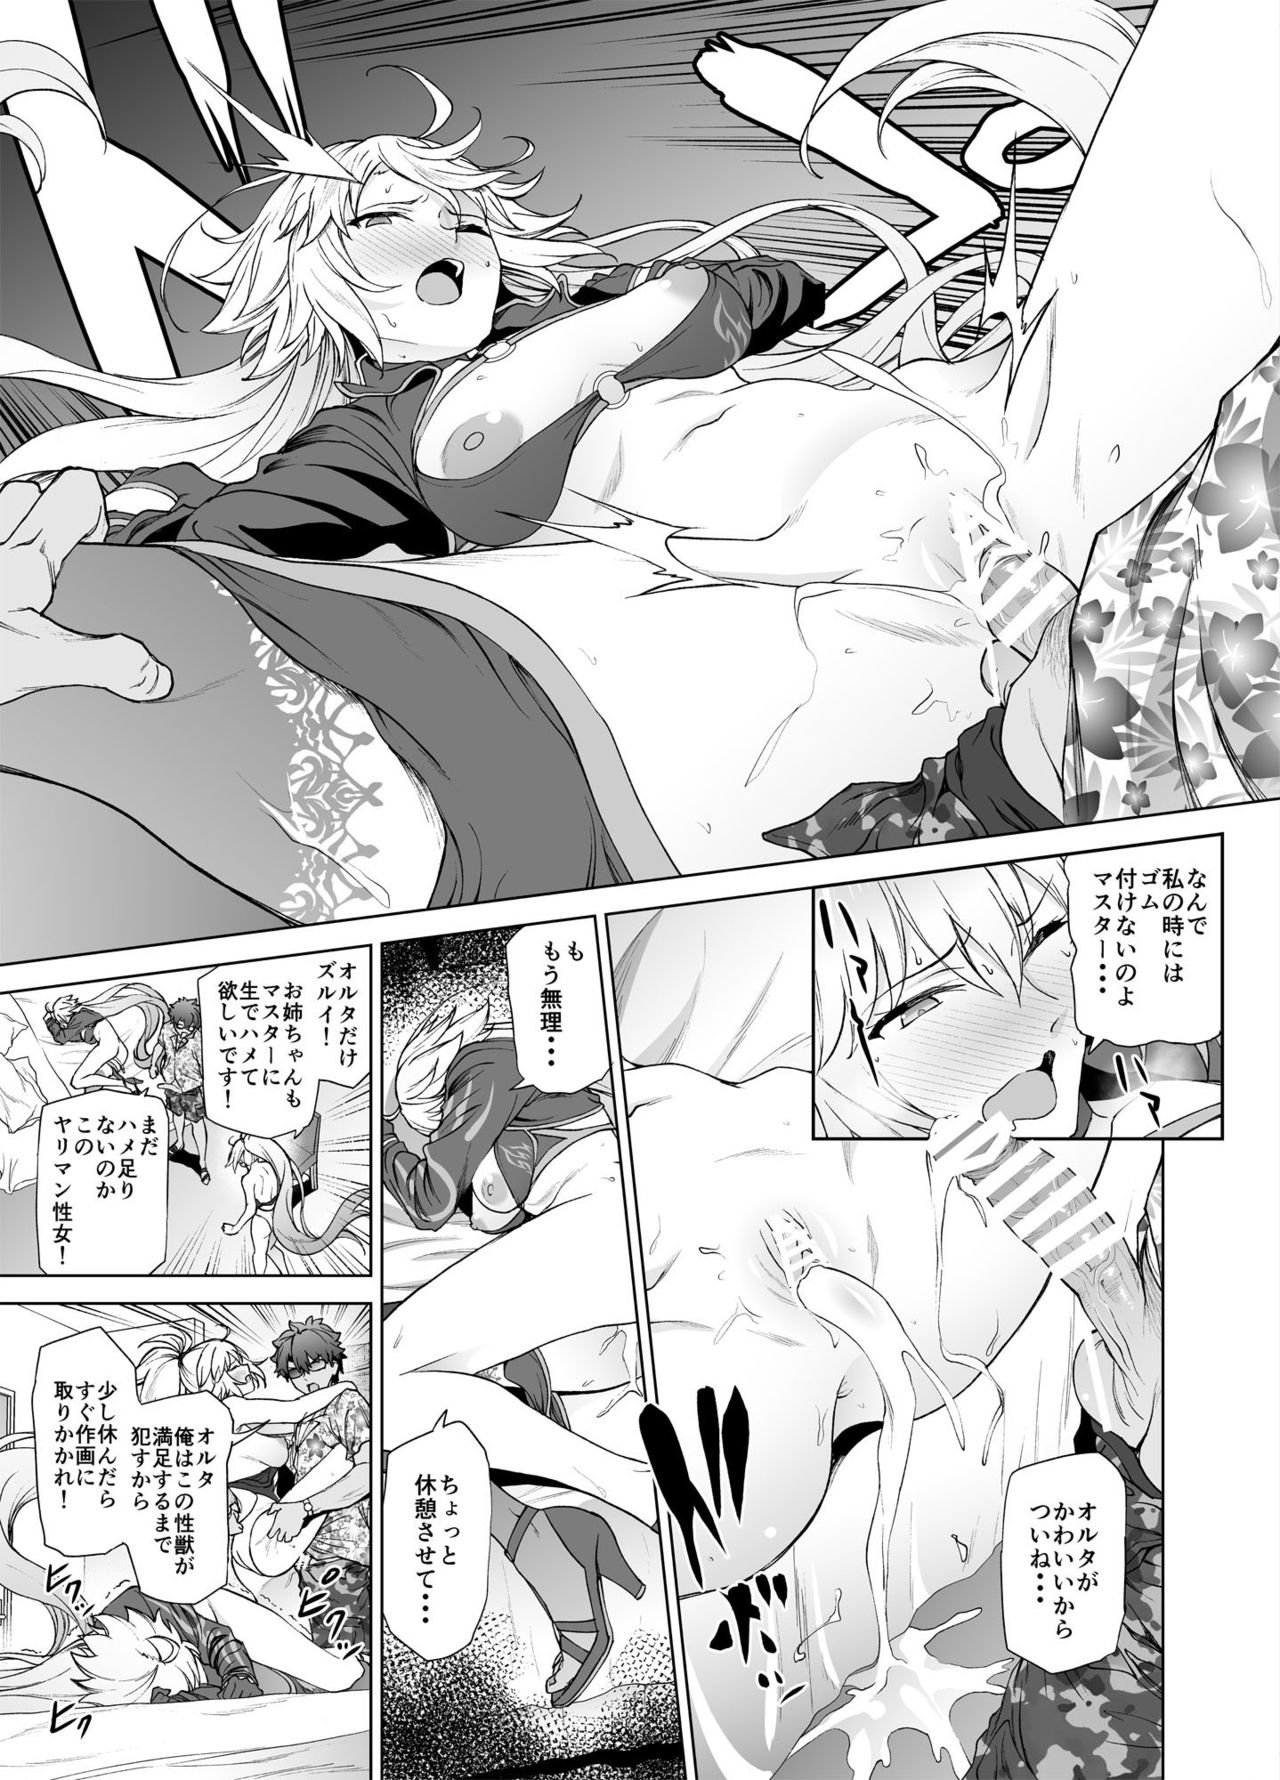 [EXTENDED PART (Endo Yoshiki)] Jeanne W (Fate/Grand Order) [Digital] page 22 full